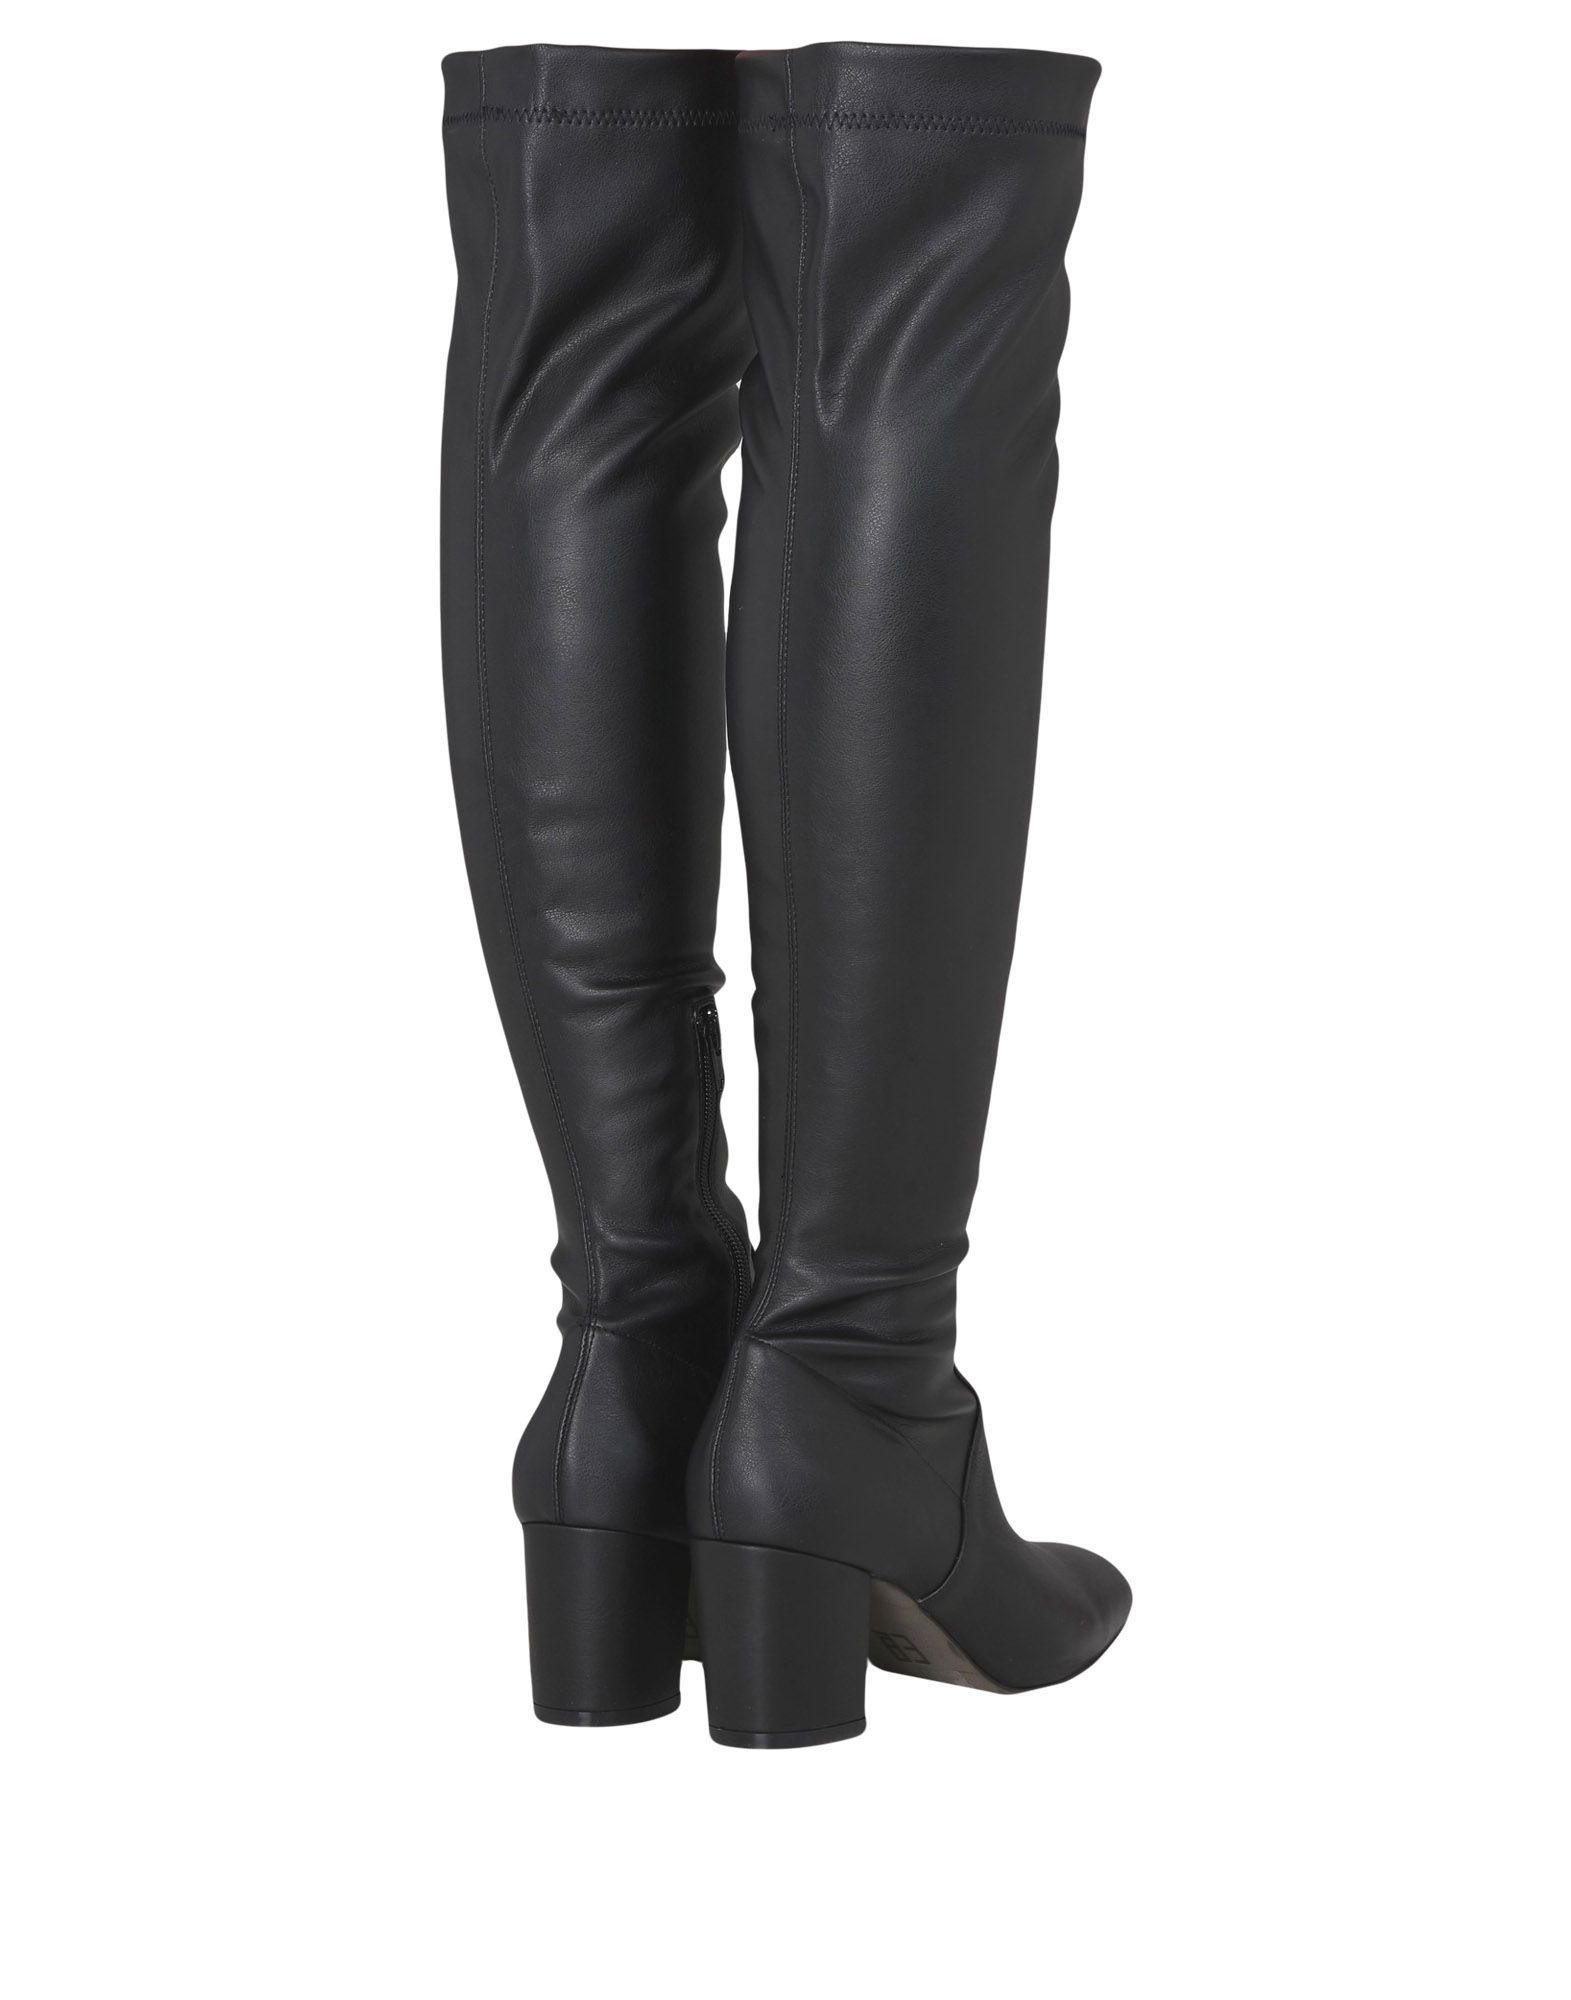 leather, no appliqués, basic solid colour, zip, square toeline, square heel, fully lined, leather sole, contains non-textile parts of animal origin, over the knee boots